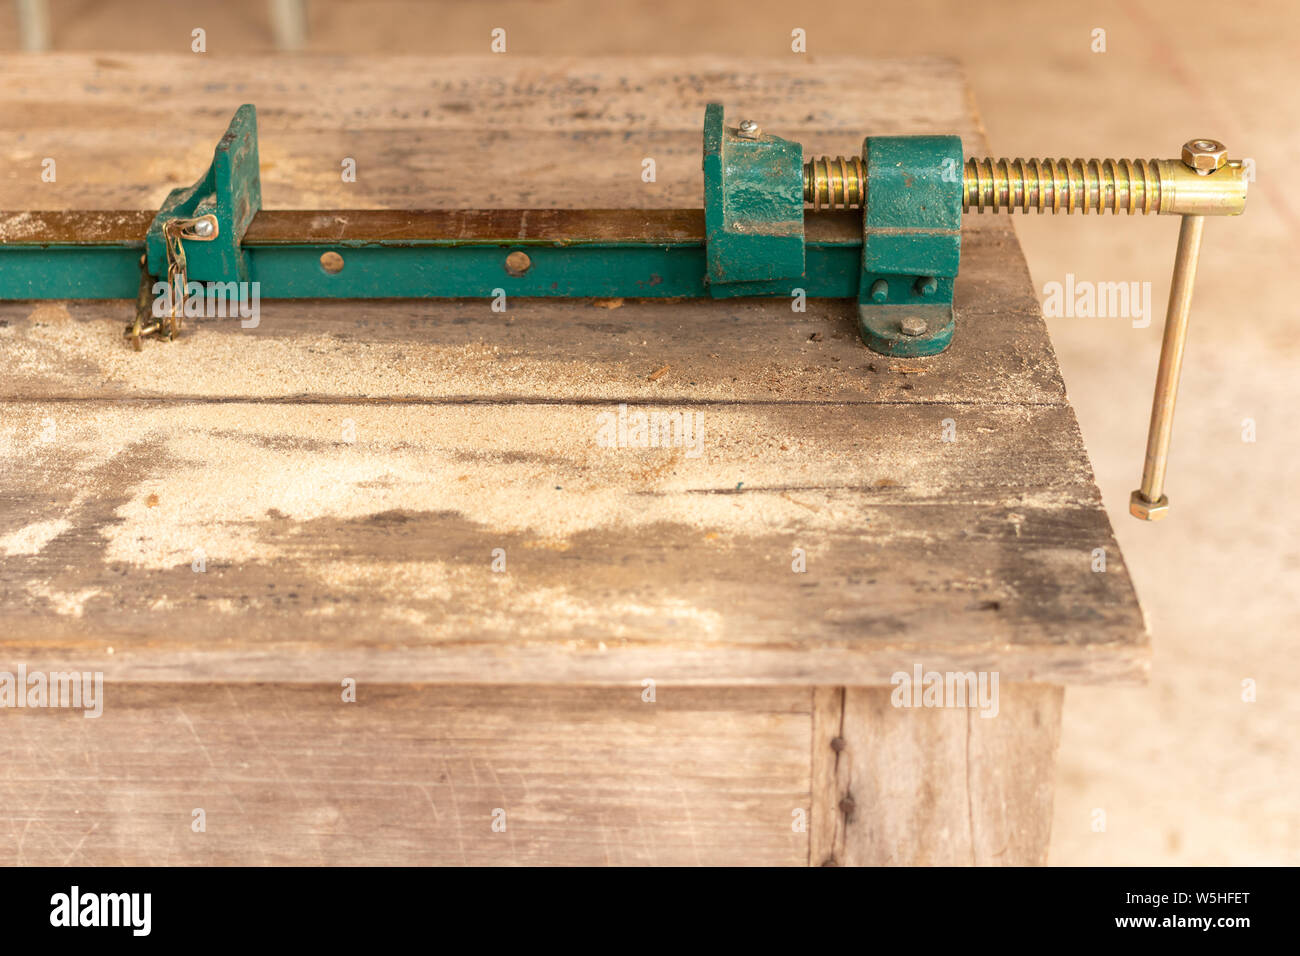 Workpiece clamp, Metal table vise clamp on the wood table. Copy space for text. Stock Photo